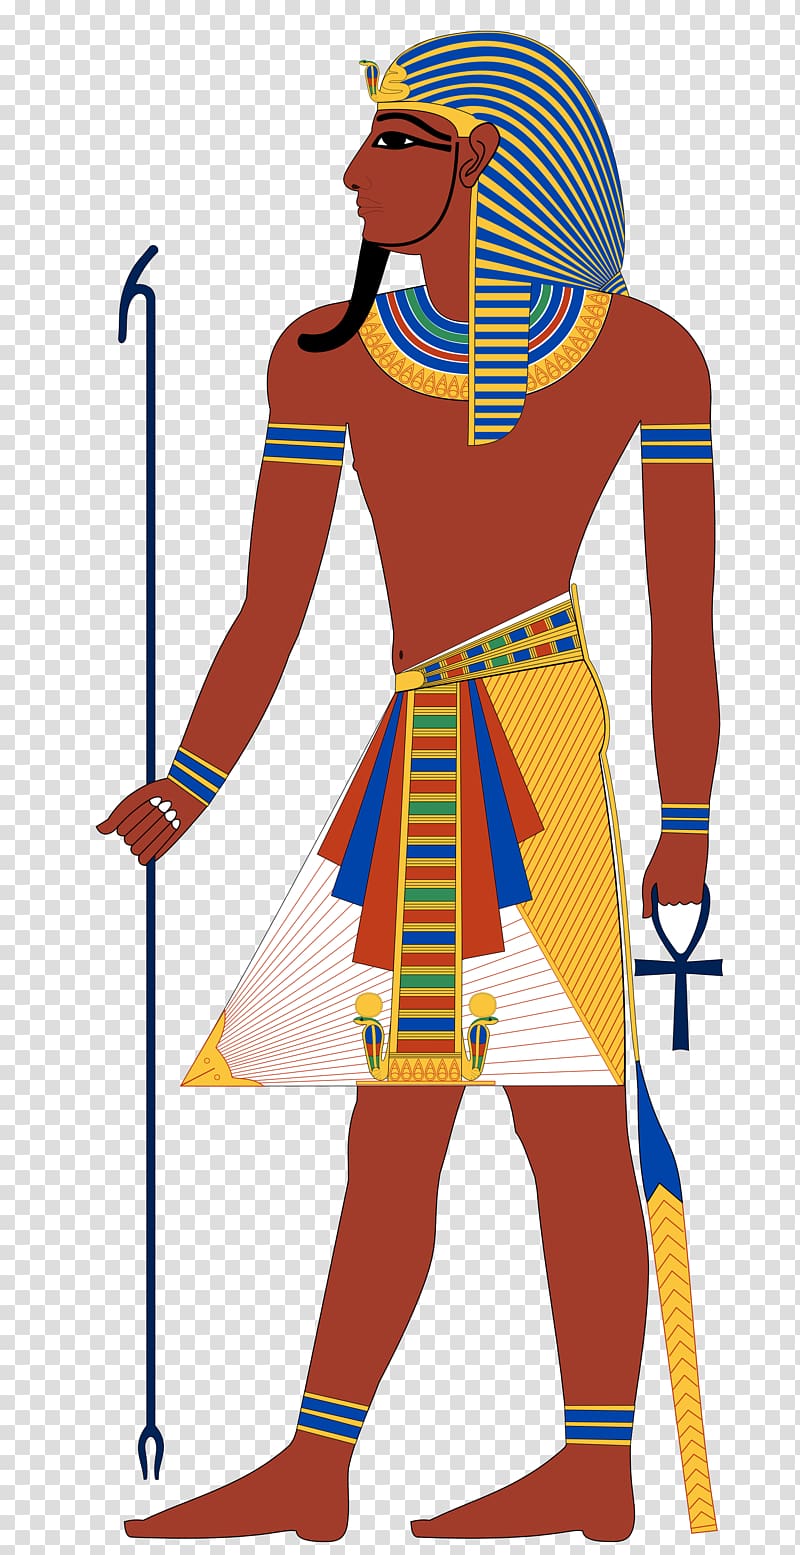 Ancient Egypt New Kingdom of Egypt Tutankhamun Early Dynastic Period, Pyramid Builder transparent background PNG clipart